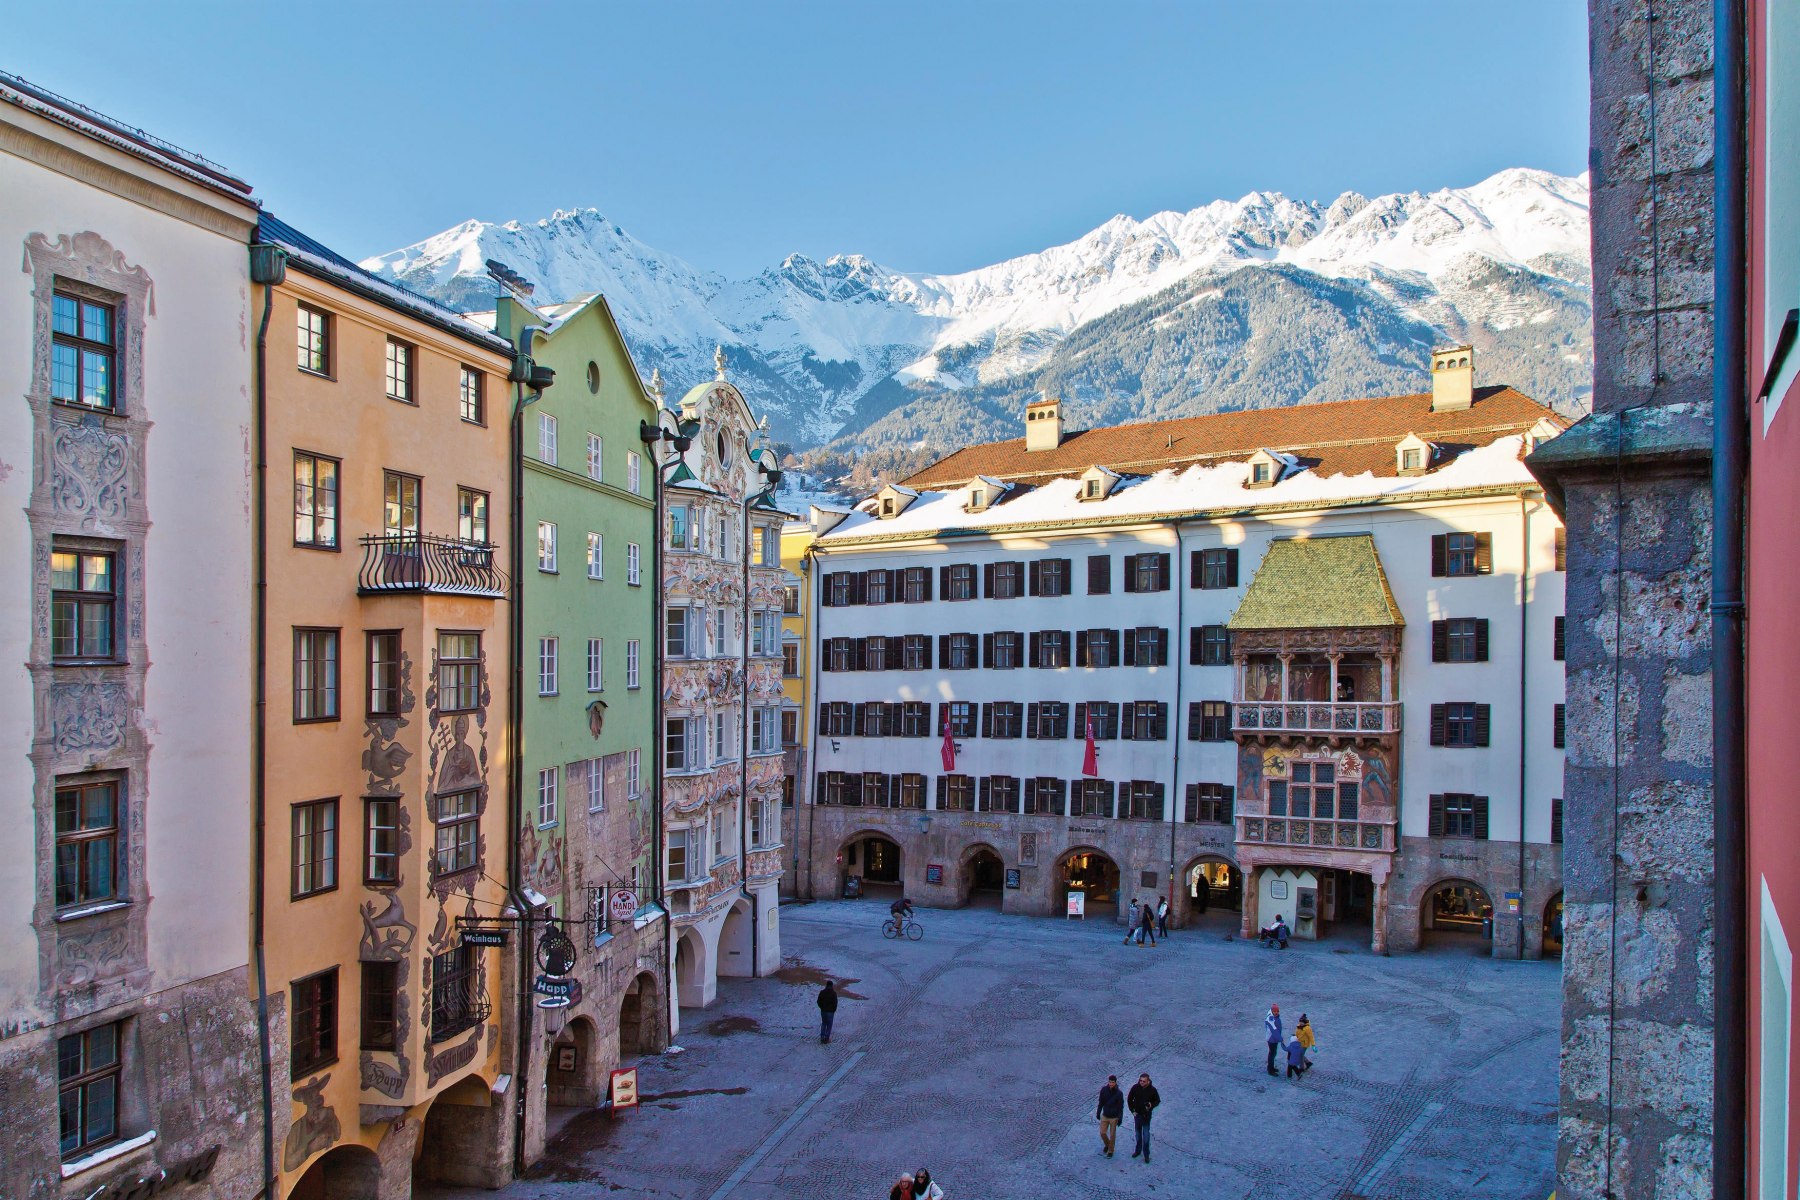 Abb. The Innsbruck palace with its golden roof (“Goldenes Dachl”)